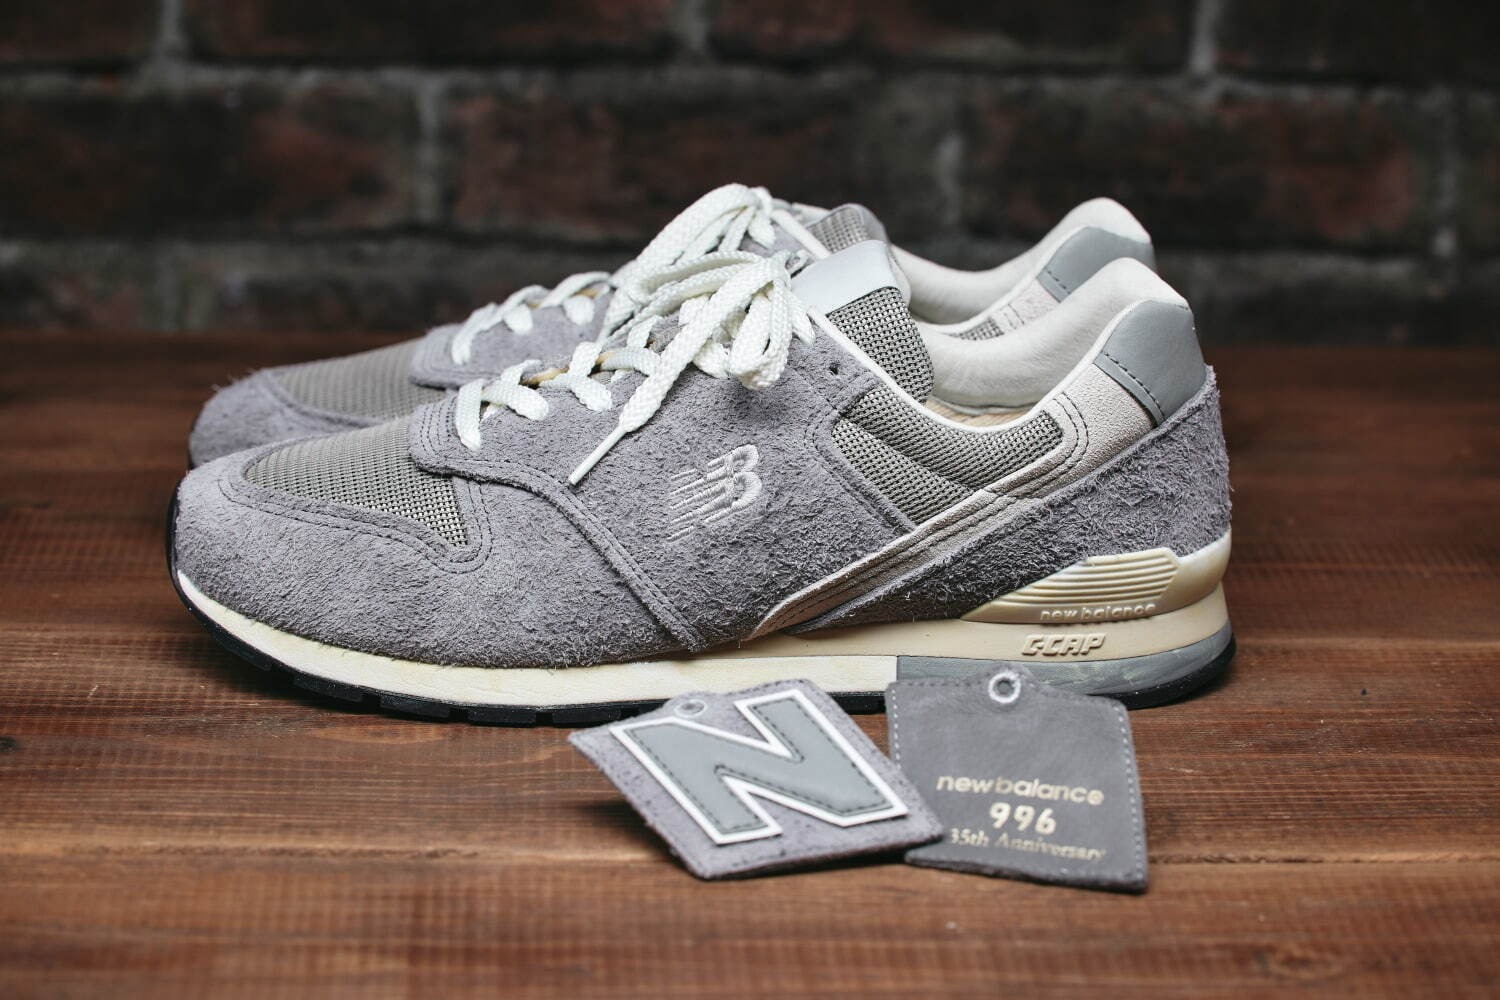 New Balance's 996 Turns 35 With Suede Colorways